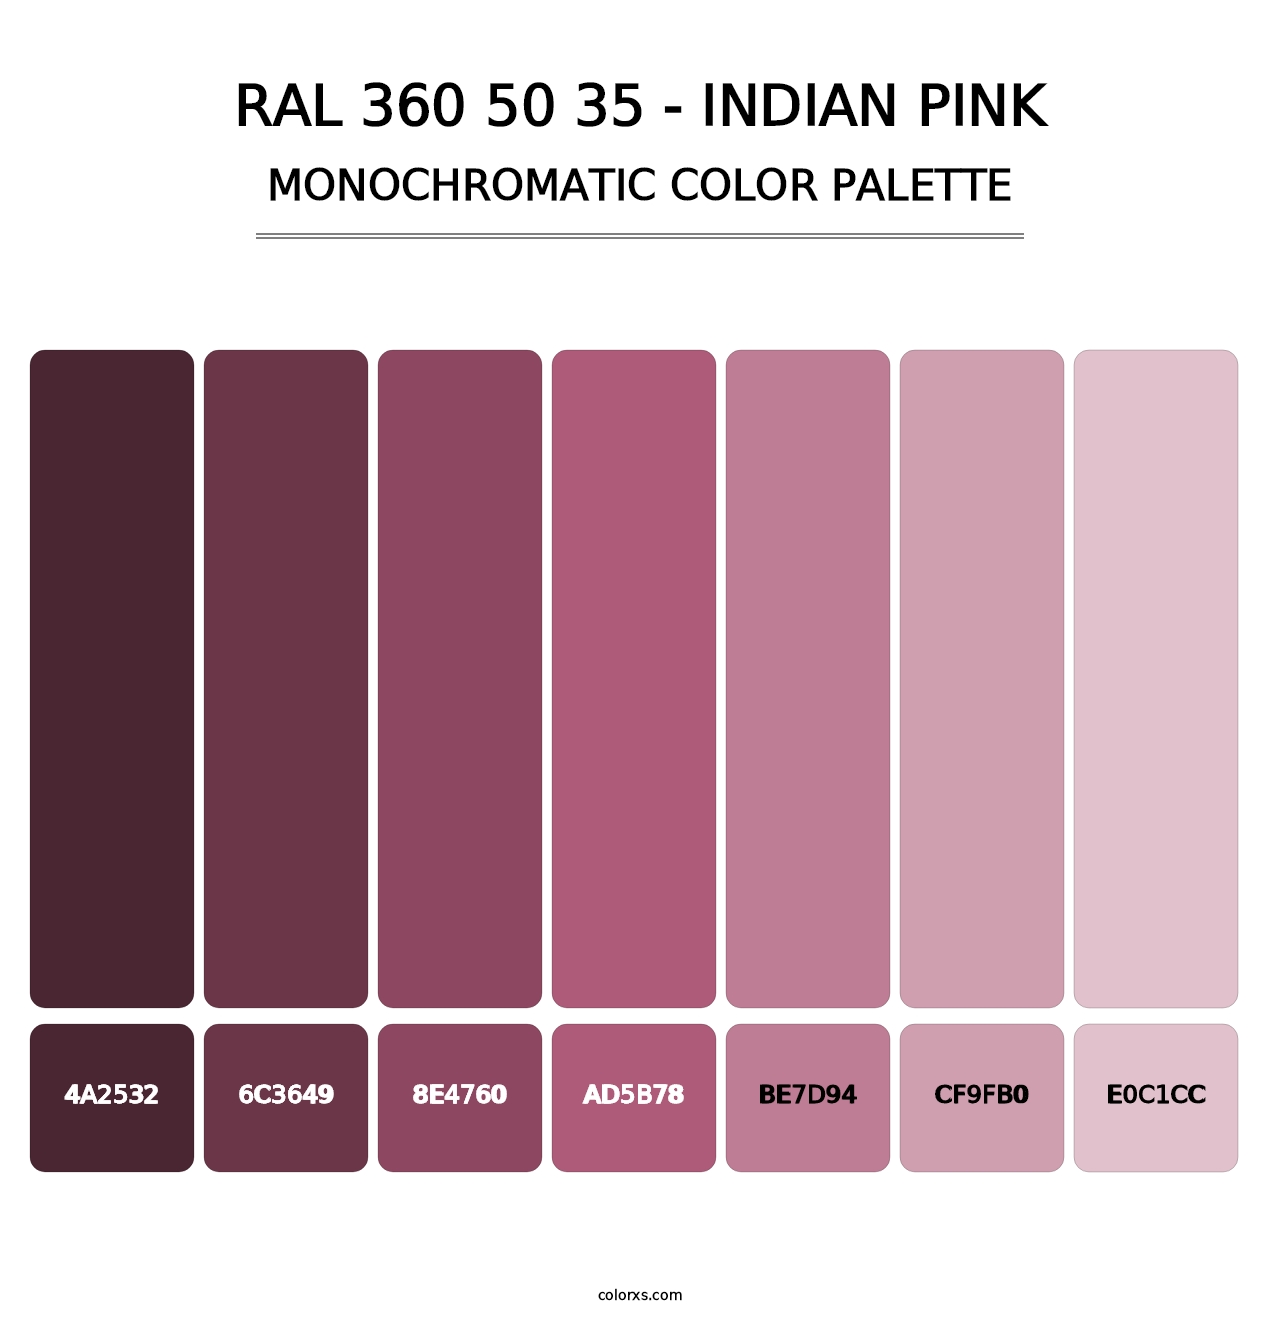 RAL 360 50 35 - Indian Pink - Monochromatic Color Palette